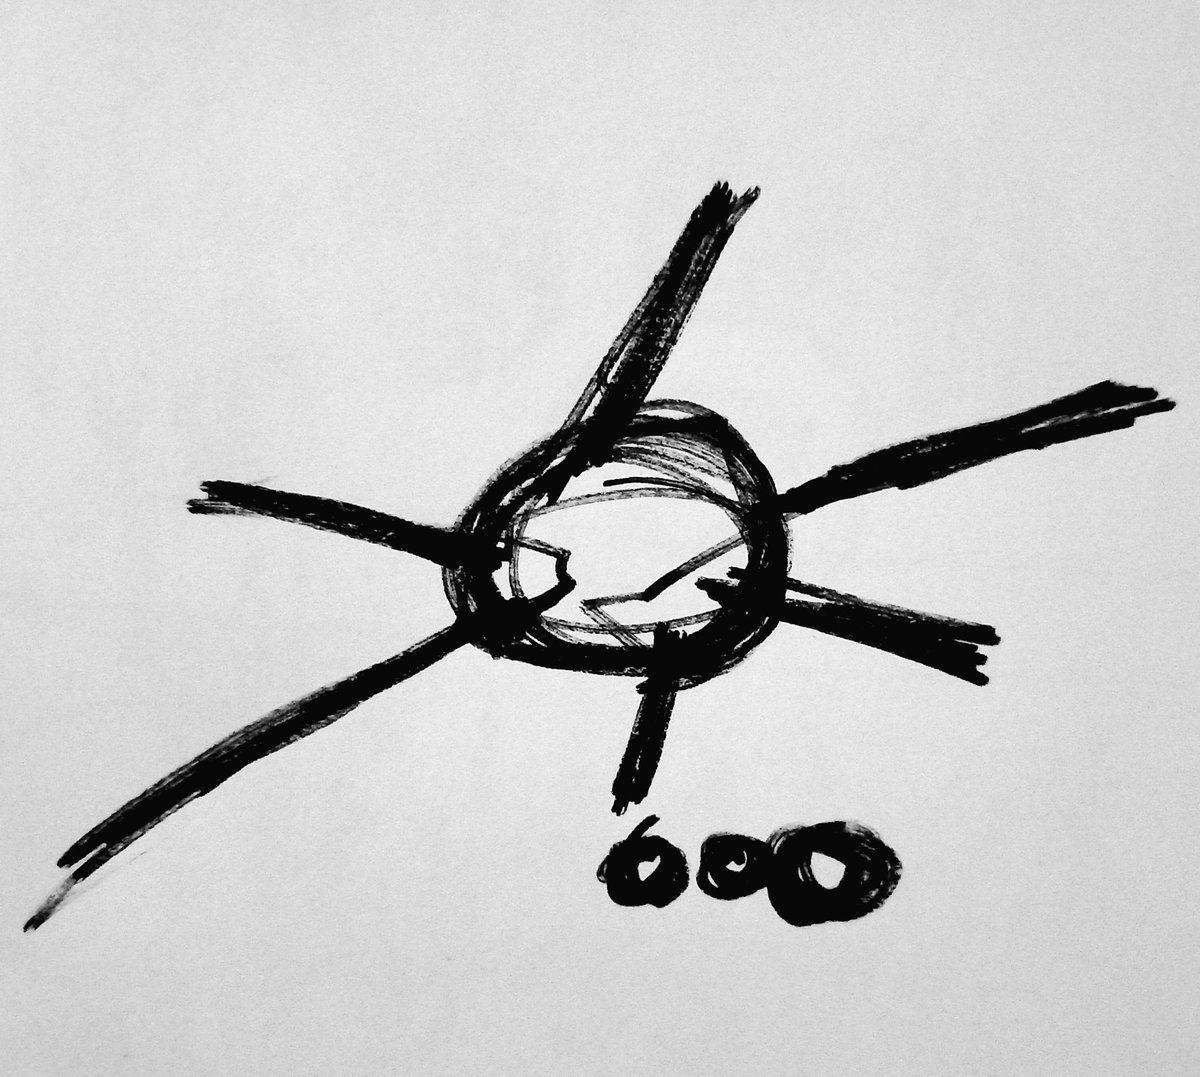 #draweveryday #everyday ' #north #sun  ' #pen  on paper #handdrawn #sketchpad #strange #mystery #synesthesia #line #sculptural #art #architectonic  #symbol